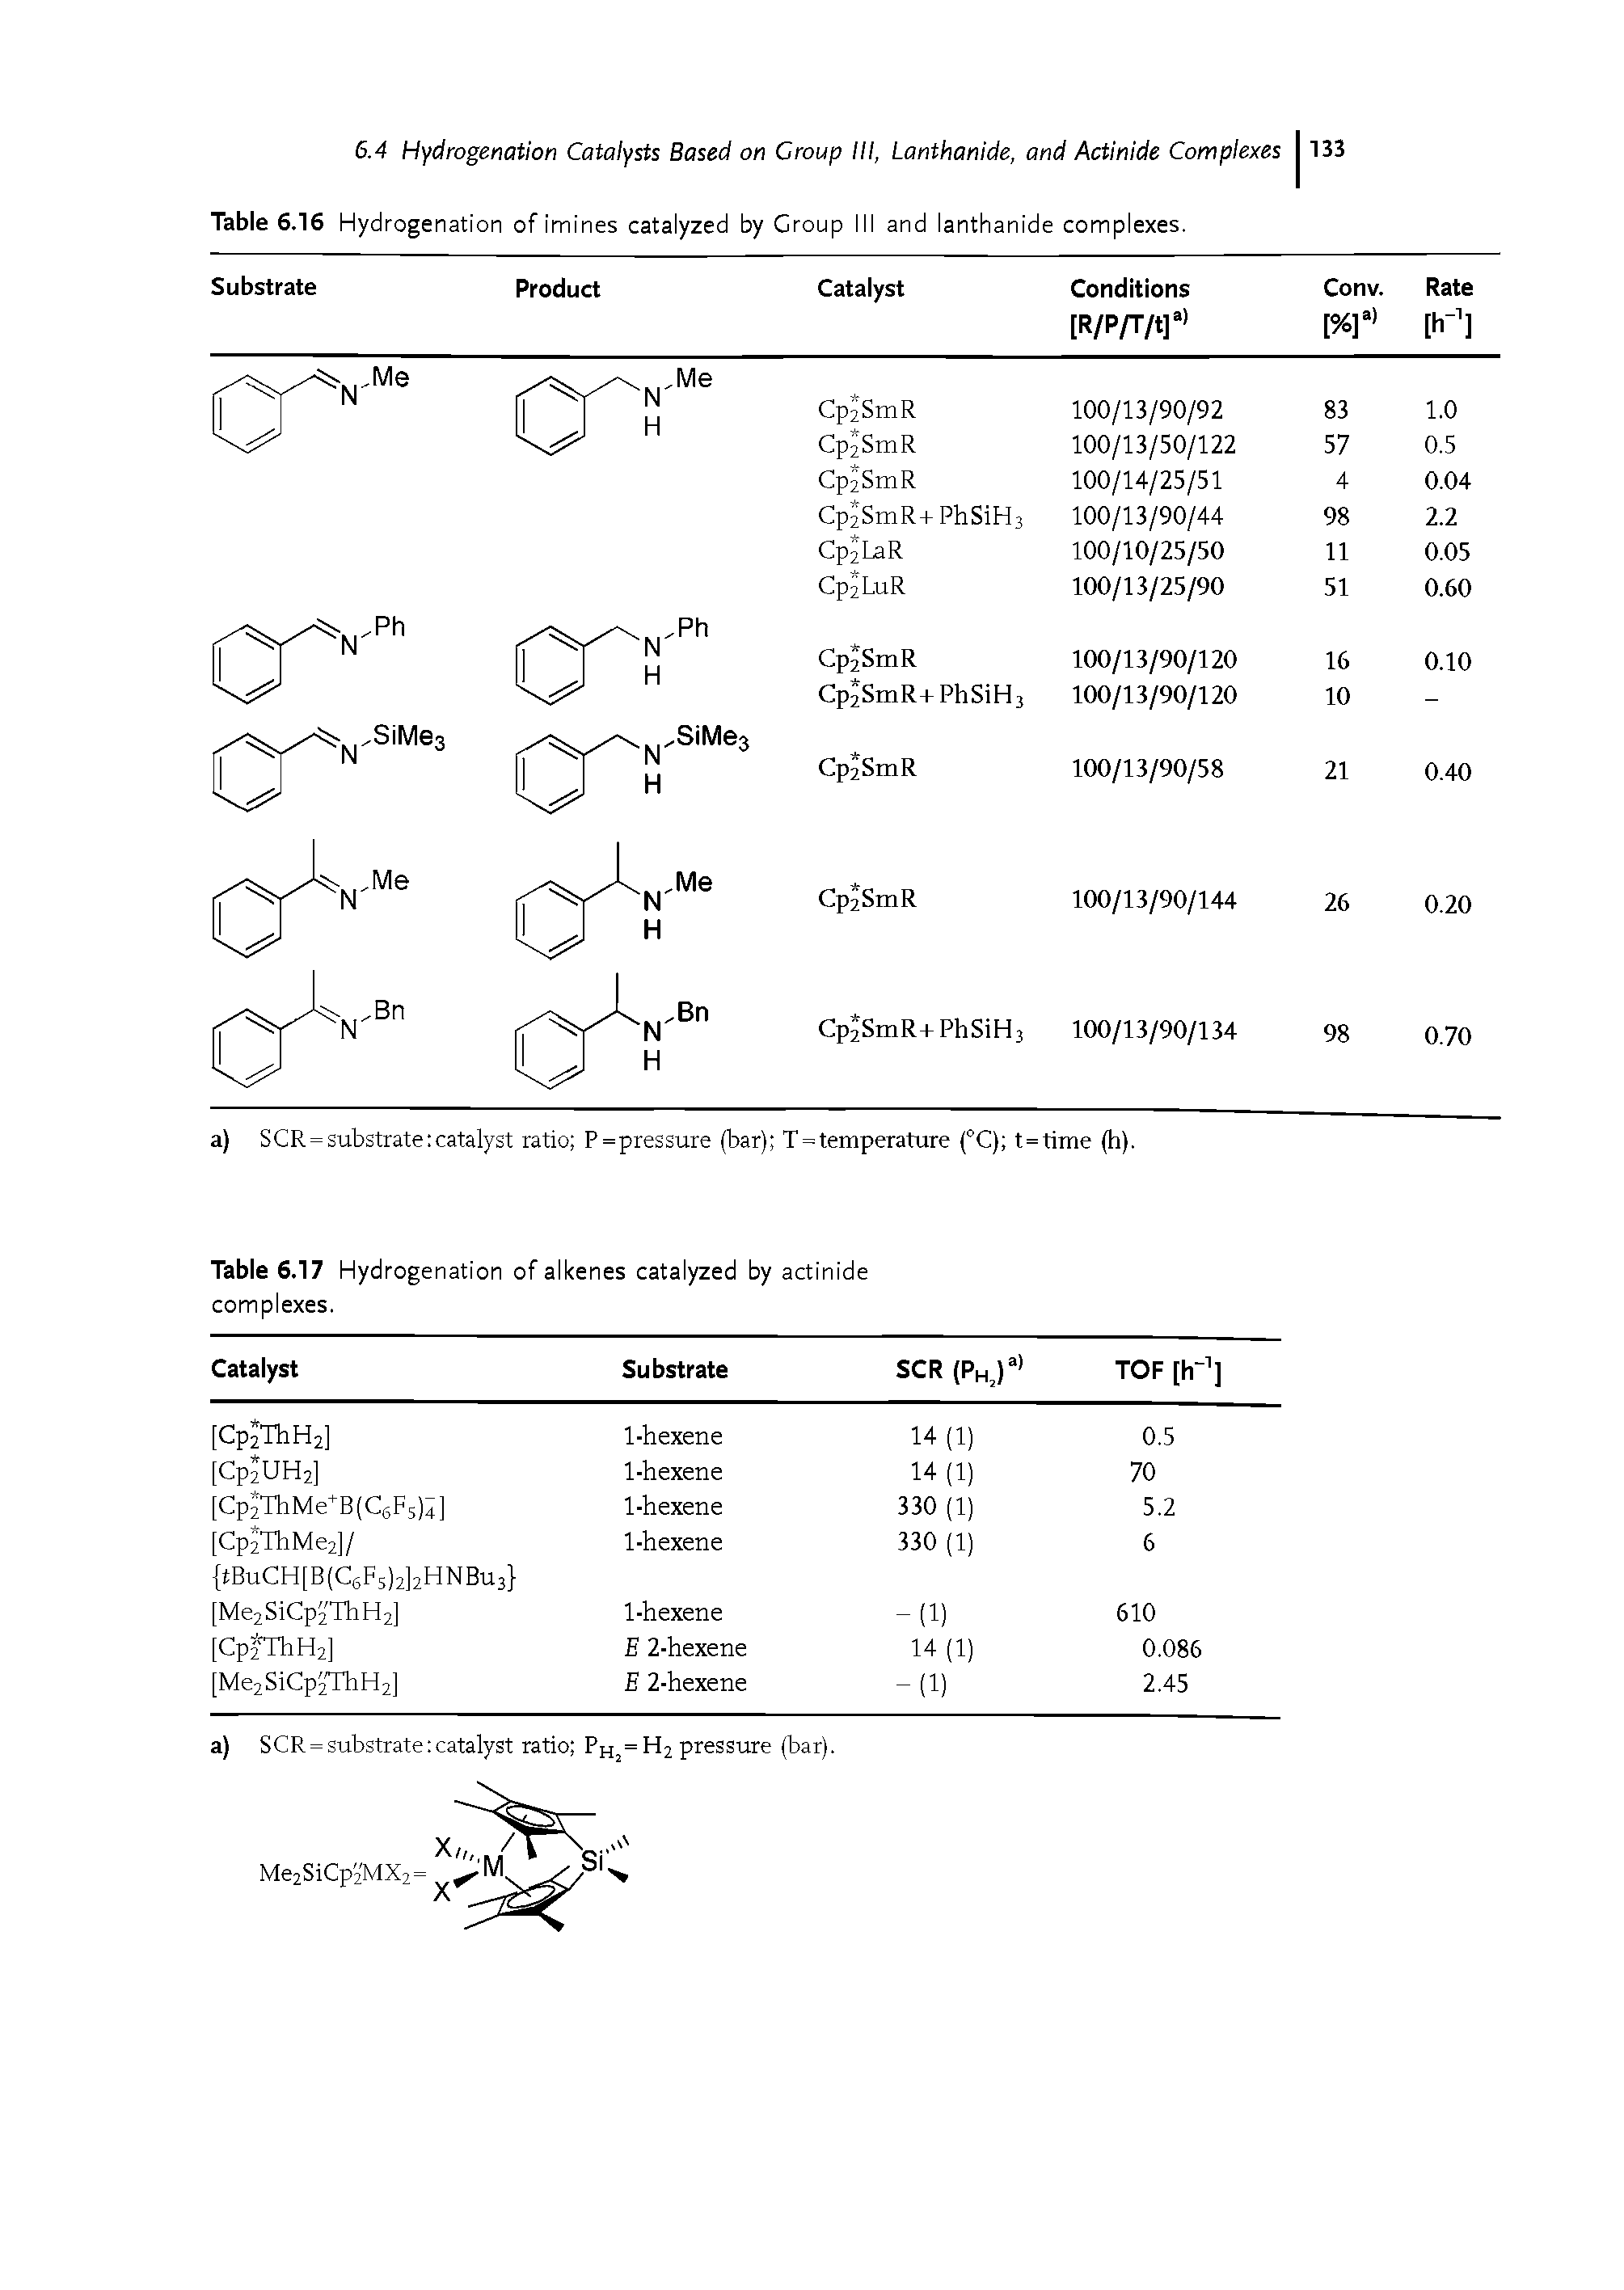 Table 6.16 Hydrogenation of imines catalyzed by Croup III and lanthanide complexes.